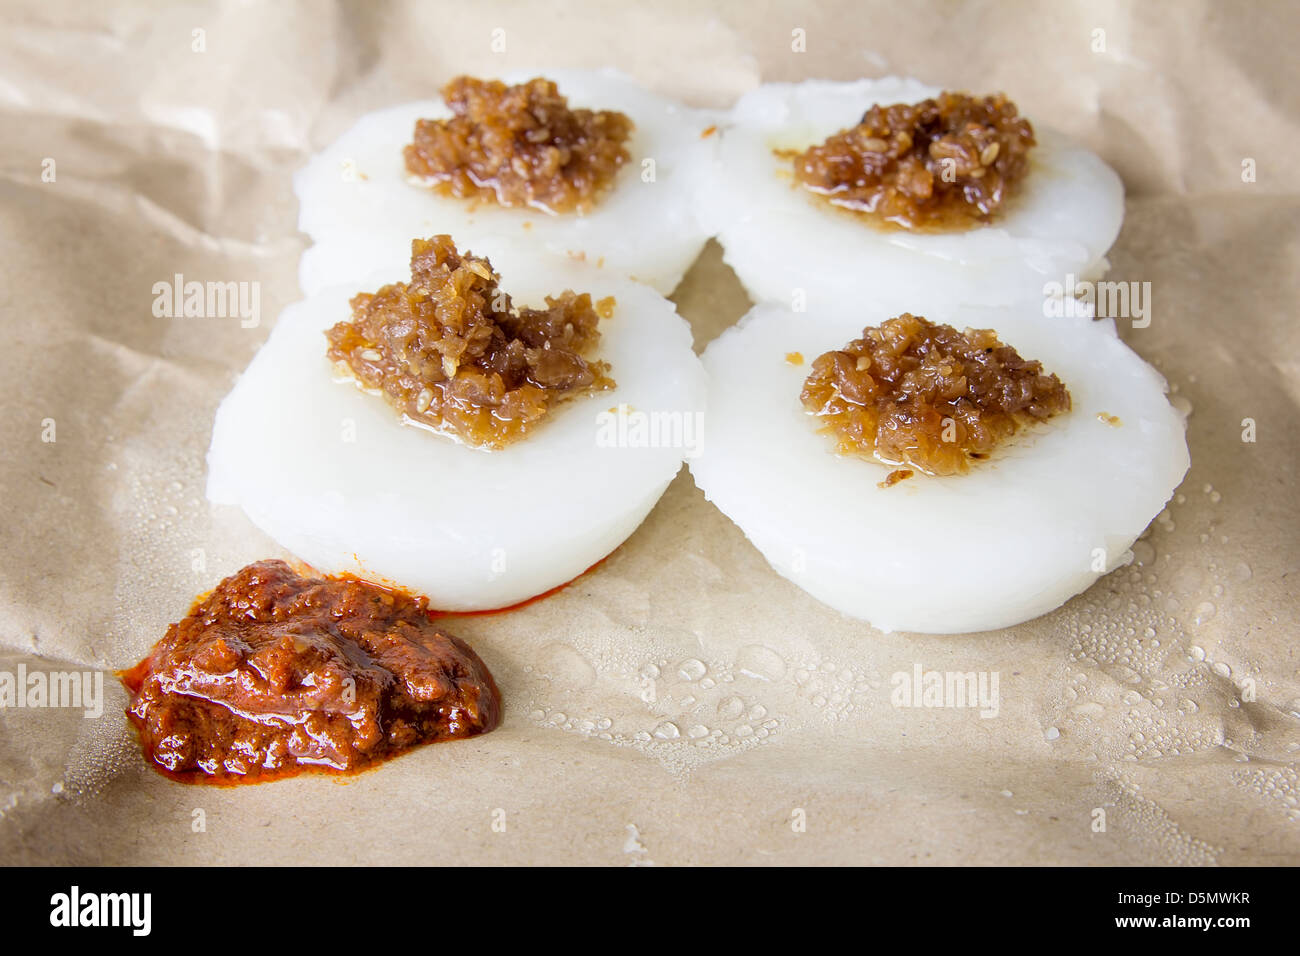 Singapore Chwee Kueh Steamed Water Rice Cake with Preserved Turnip and Chili Paste Closeup Stock Photo